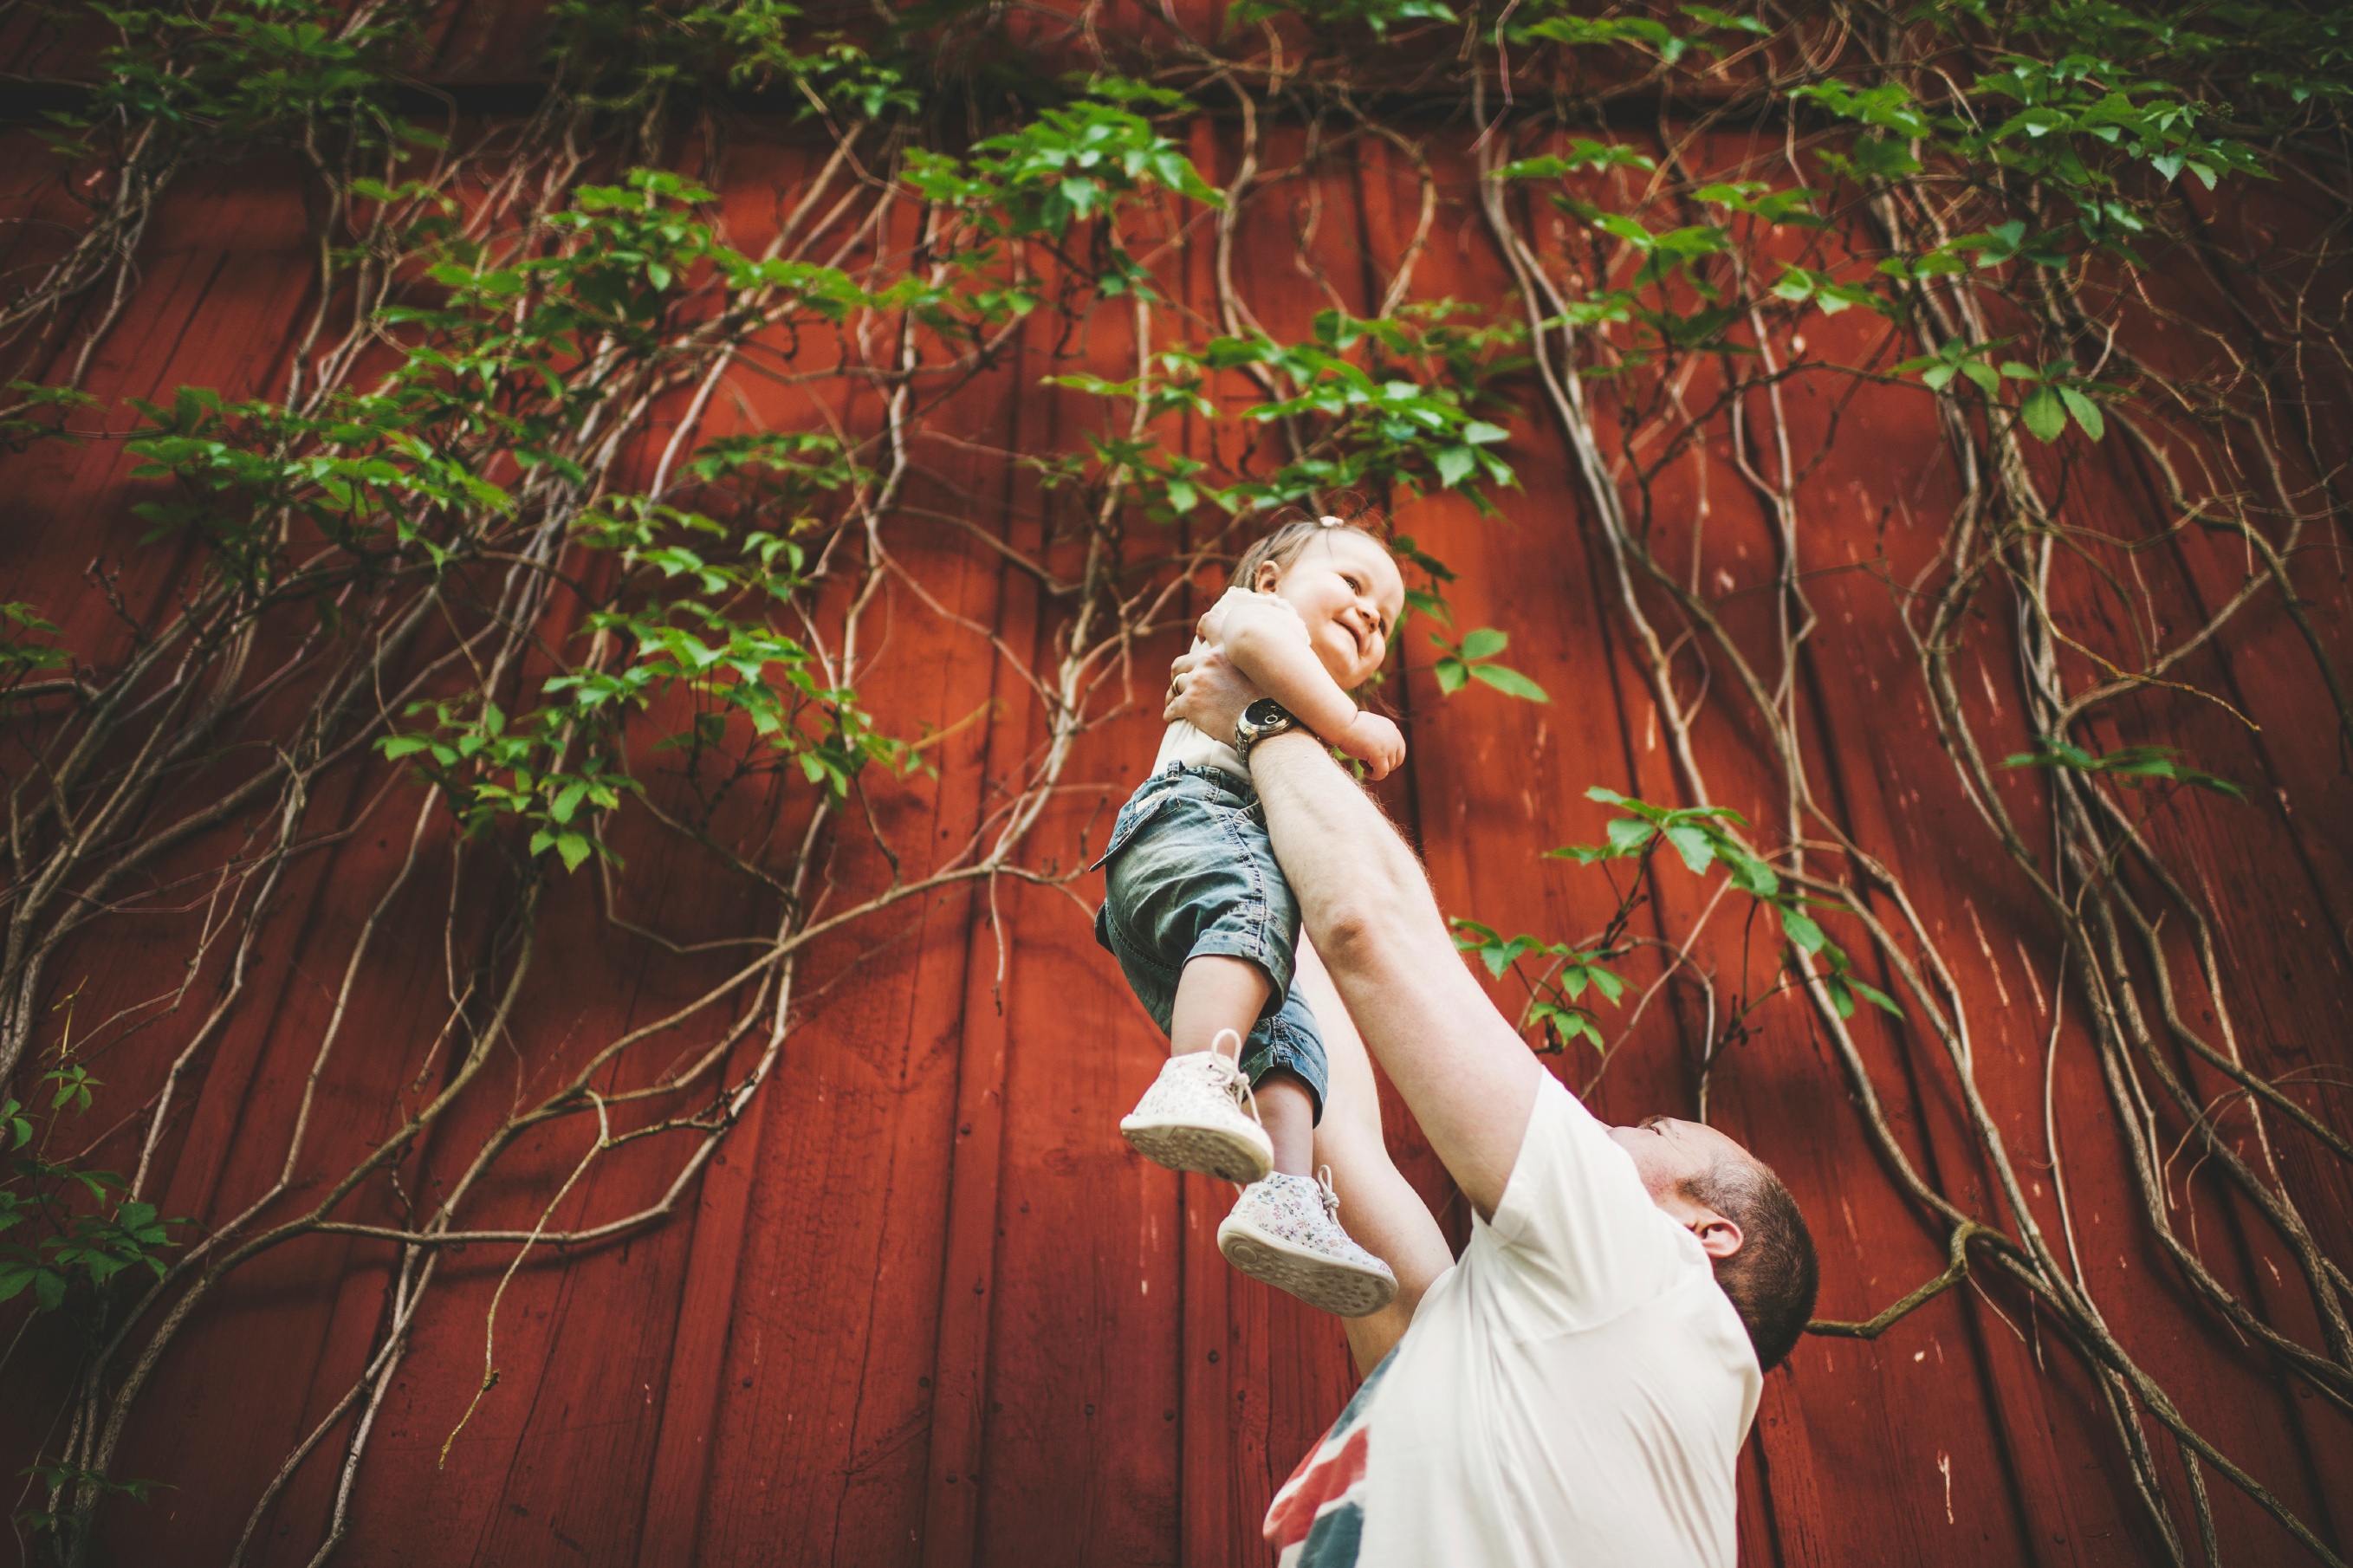 Raising a child with emotional fitness is a tremendous gift